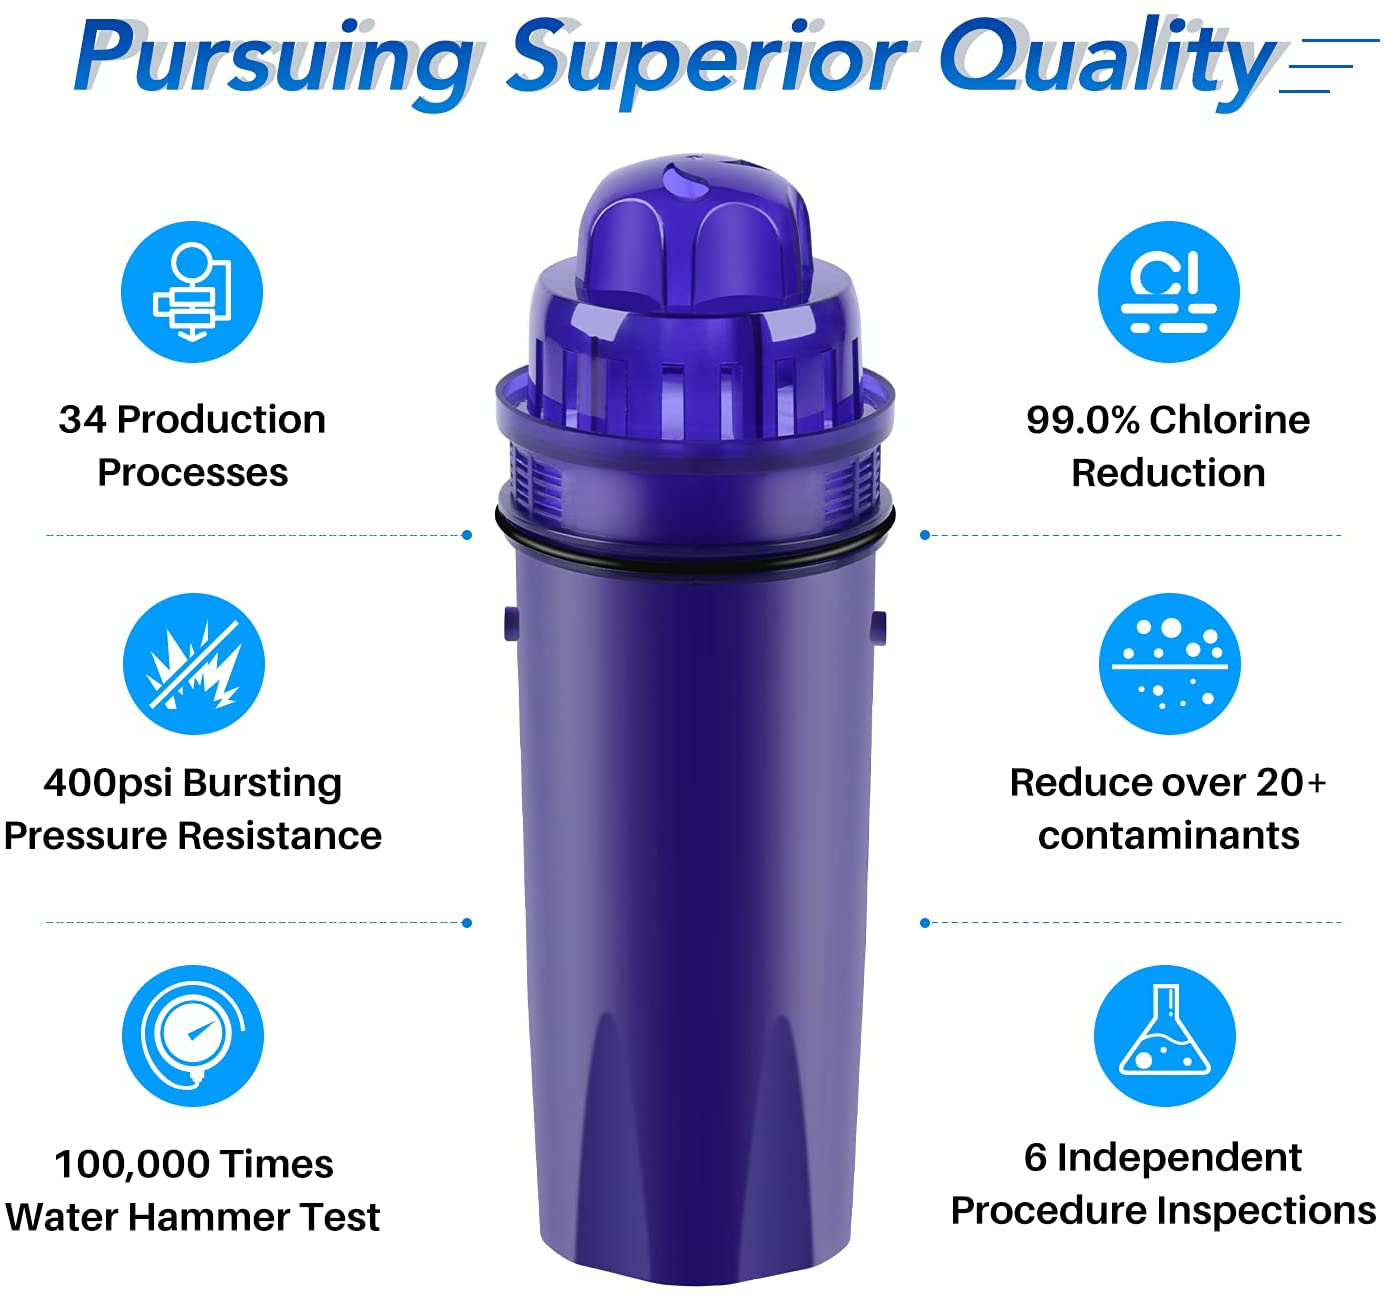 ICEPURE CRF-950Z Pitcher Water Filter Replacement for PUR CRF950Z, PPF900Z, PPF951K, PPT700W, CR-1100C, CR1100CV, DS-1800Z, PPT711W, PPT711B, PPT111W and More PUR Pitcher and Dispensers System, 4PACK